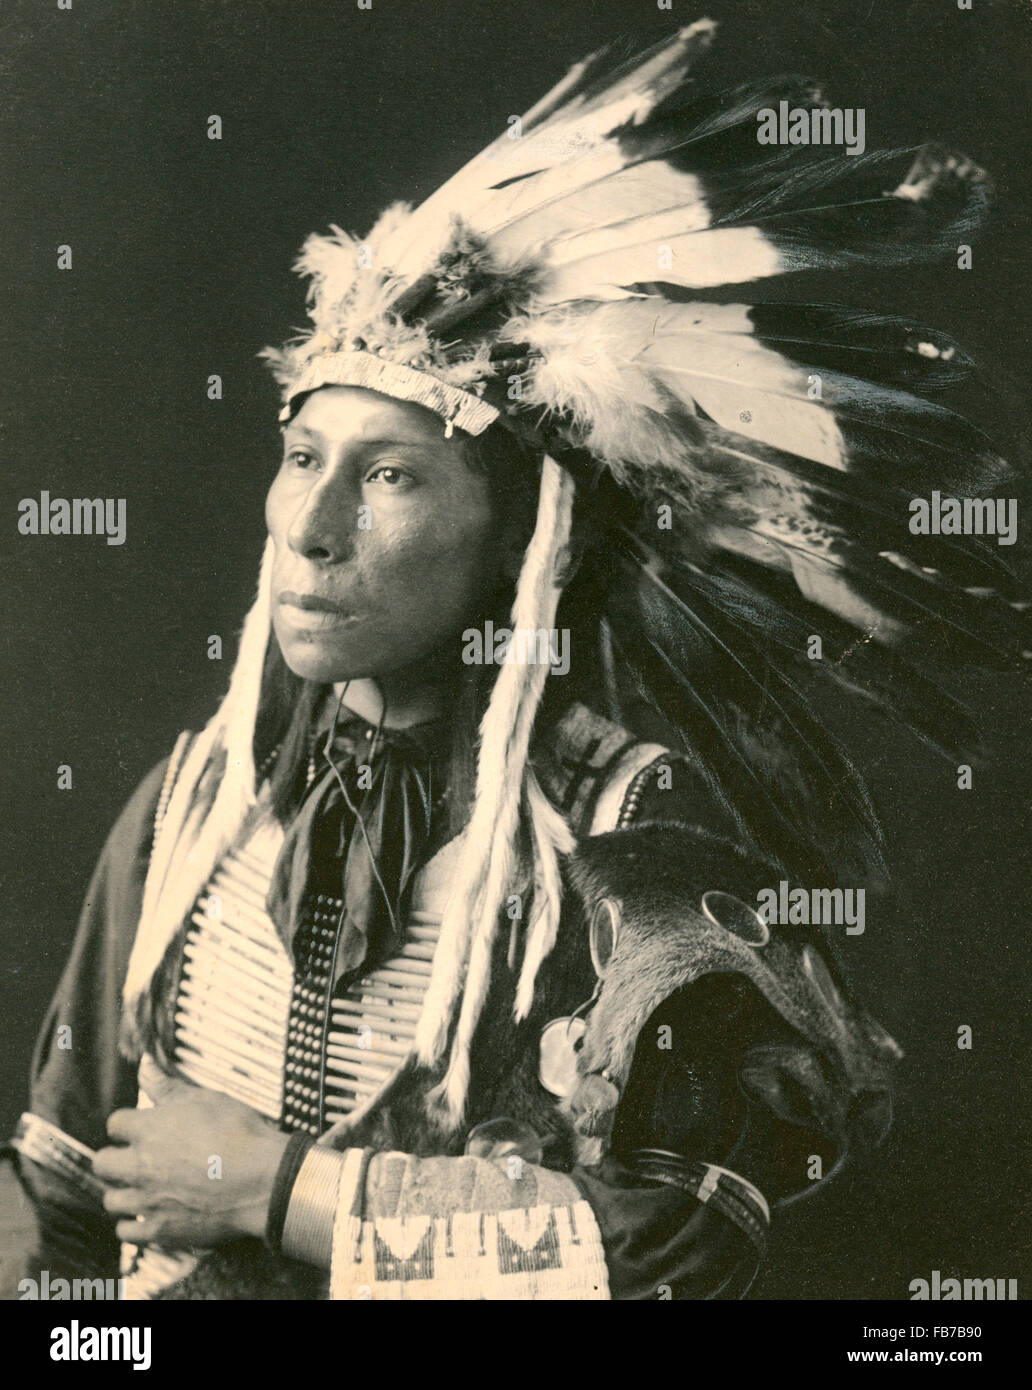 Native American Indian, Eagle Elk, Sioux Indianer Stockfoto